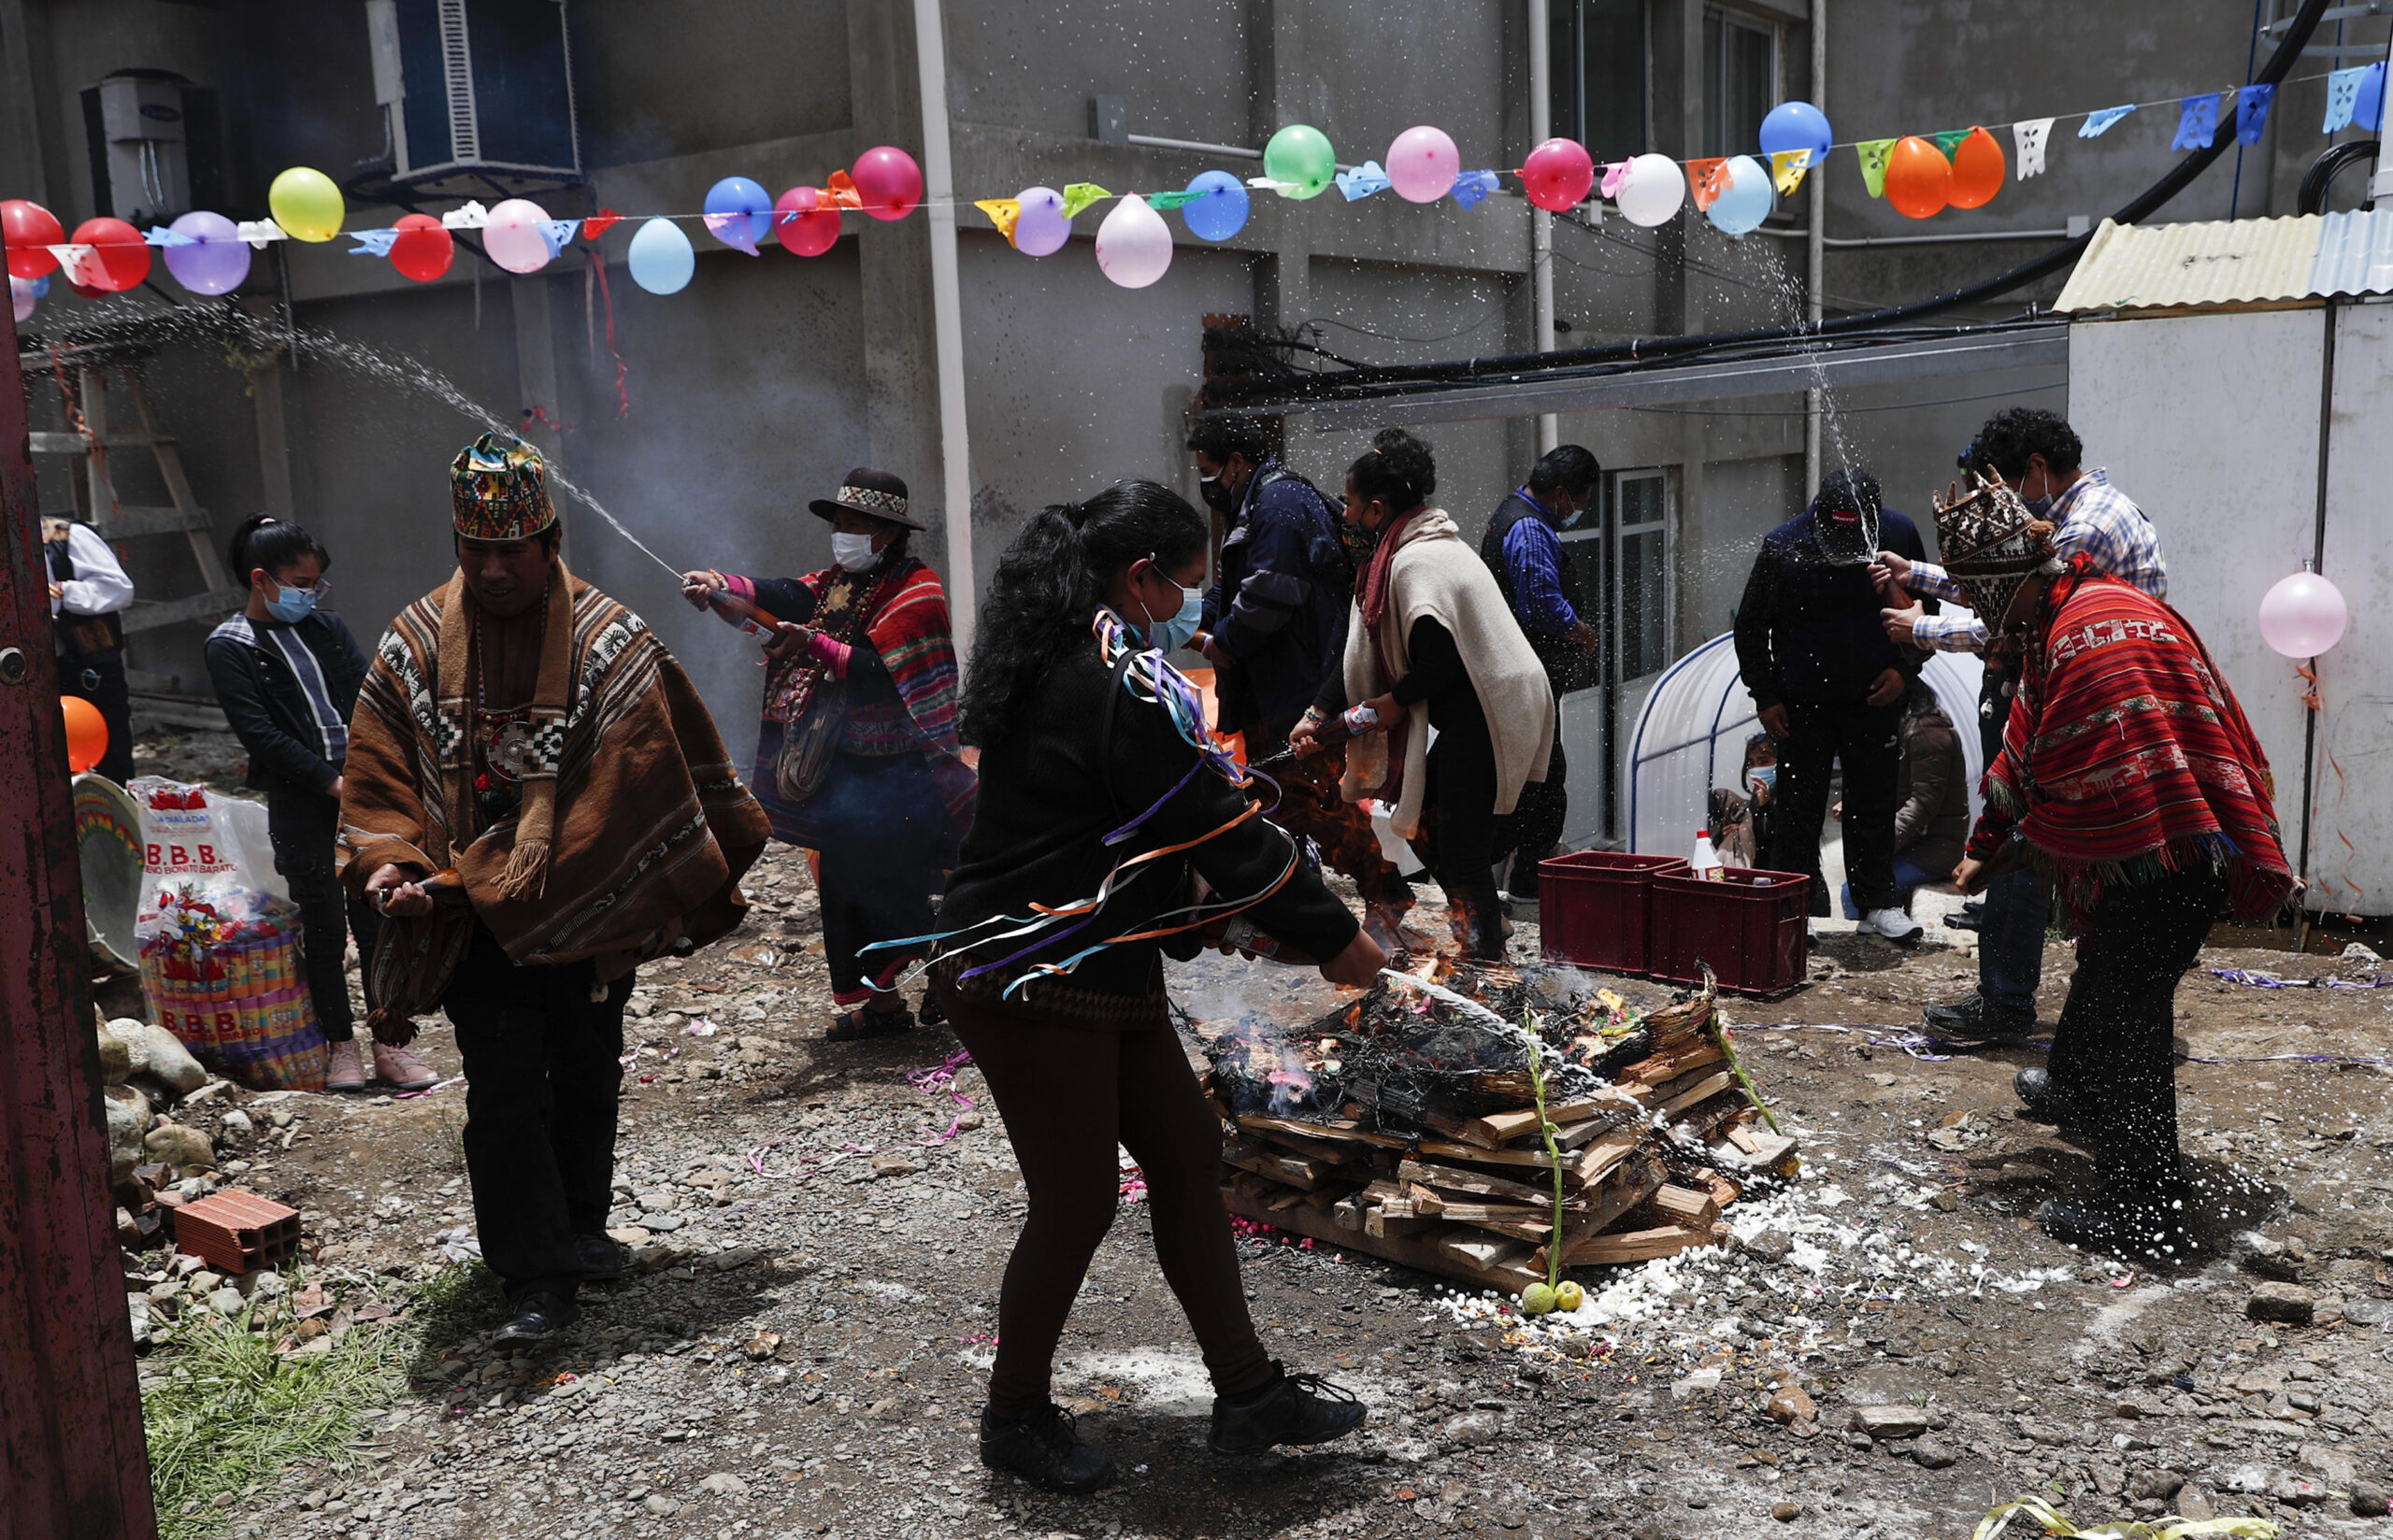 People spray the ground with beer as they celebrate "Martes de Challa,” or Challa Tuesday, in which devotees bury food, throw candies, burn incense, decorate their houses, businesses, cars, all in a show of gratitude to Pachamama or Mother Earth, in La Paz, Bolivia, Tuesday, Feb. 16, 2021. The Andean ritual coincides with the Christian holiday Shrove Tuesday, culminating with Carnival festivities to prepare for the Lenten season which begins Ash Wednesday, the following day. (AP Photo/Juan Karita)